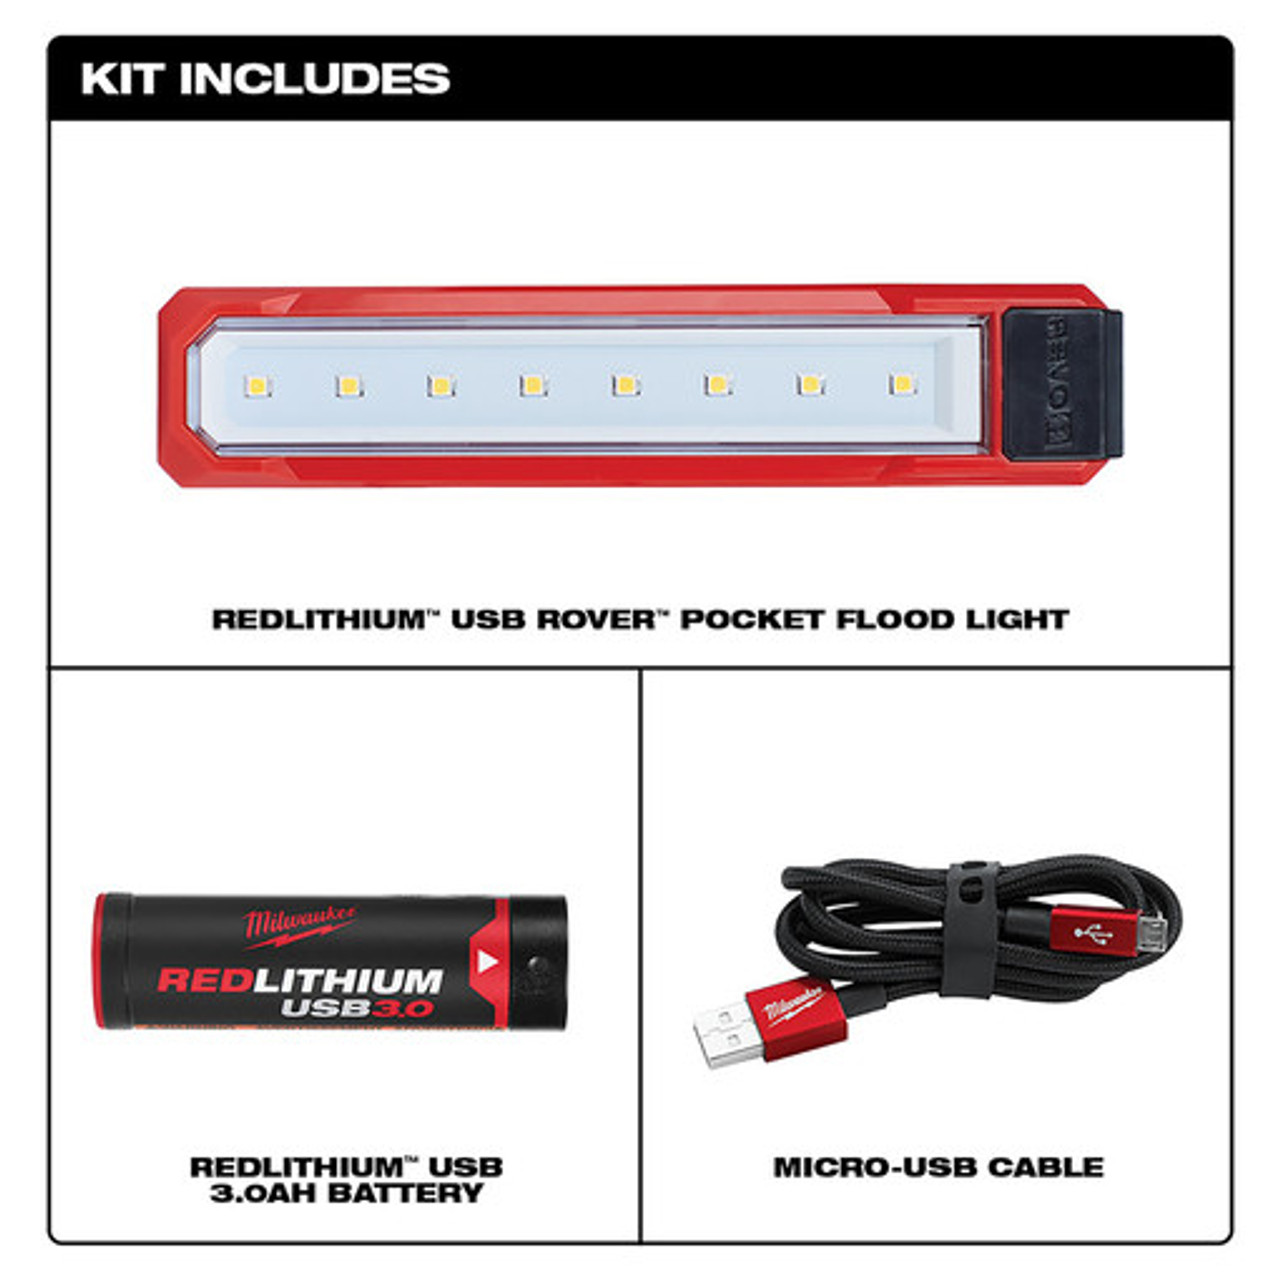 Milwaukee REDLITHIUM USB ROVER Pocket Flood Light 2112-21 Industrial  Safety Products